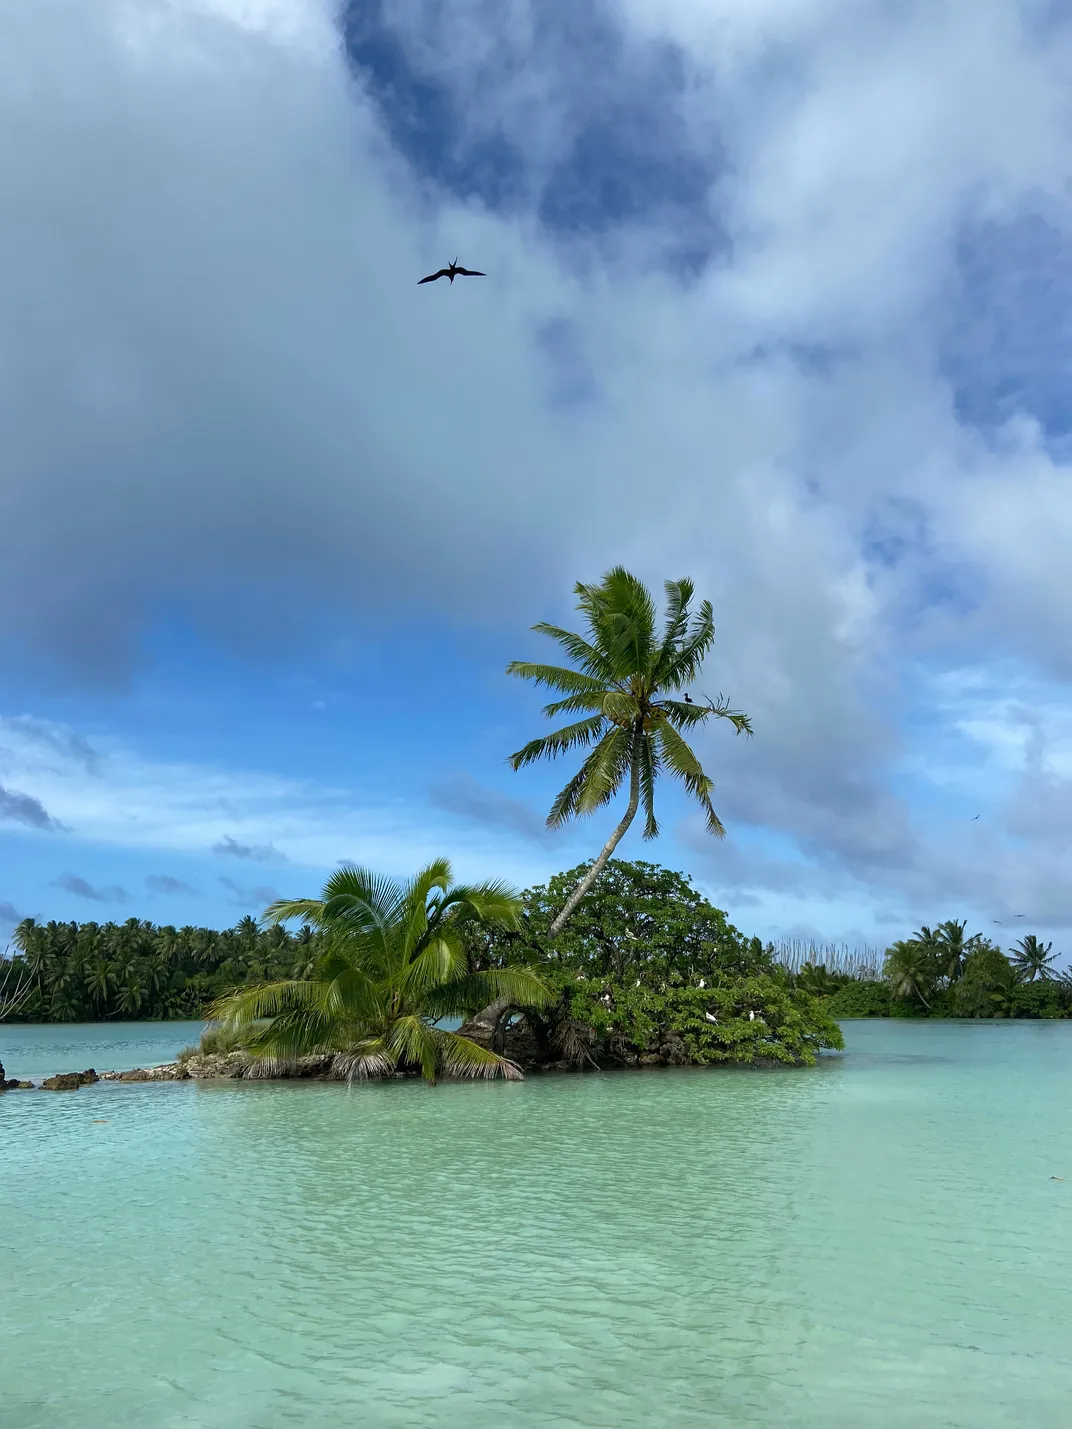 small island in the middle of an ocean, a large palm tree surrounded by other smaller trees.